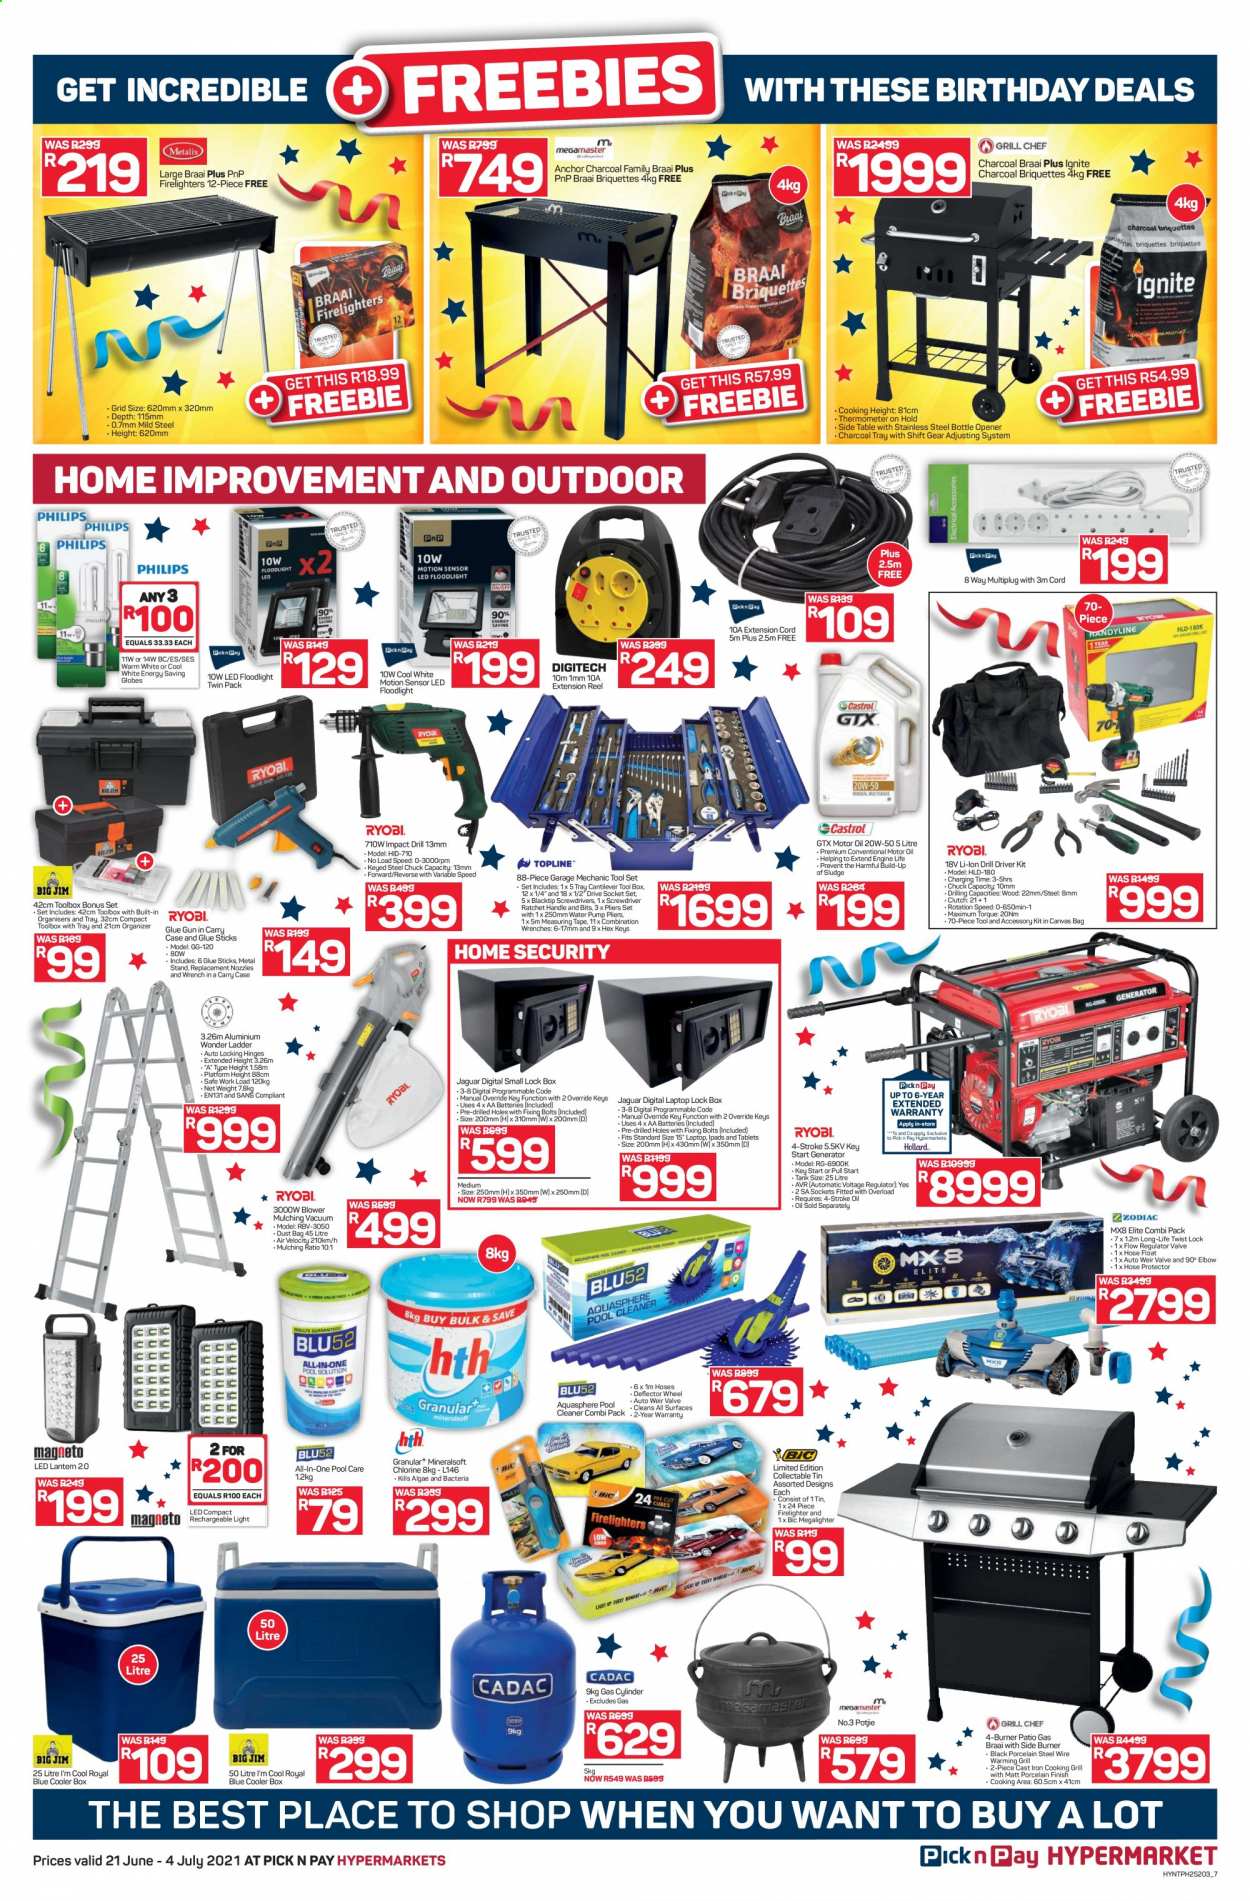 Pick n Pay specials - 06.21.2021 - 07.04.2021. 